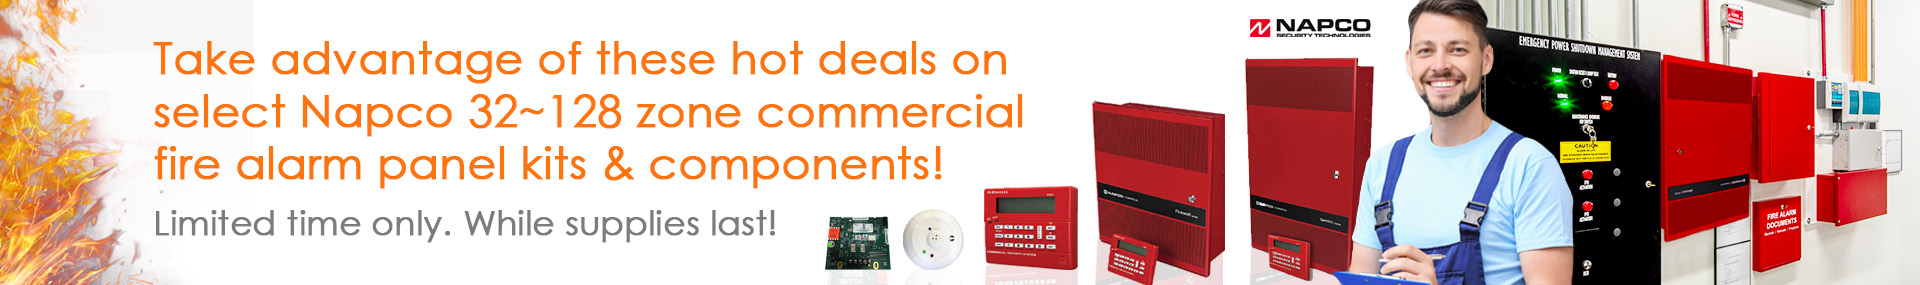 Napco Hot Deals on 32 to 128 zone commercial fire alarm panel kits and components